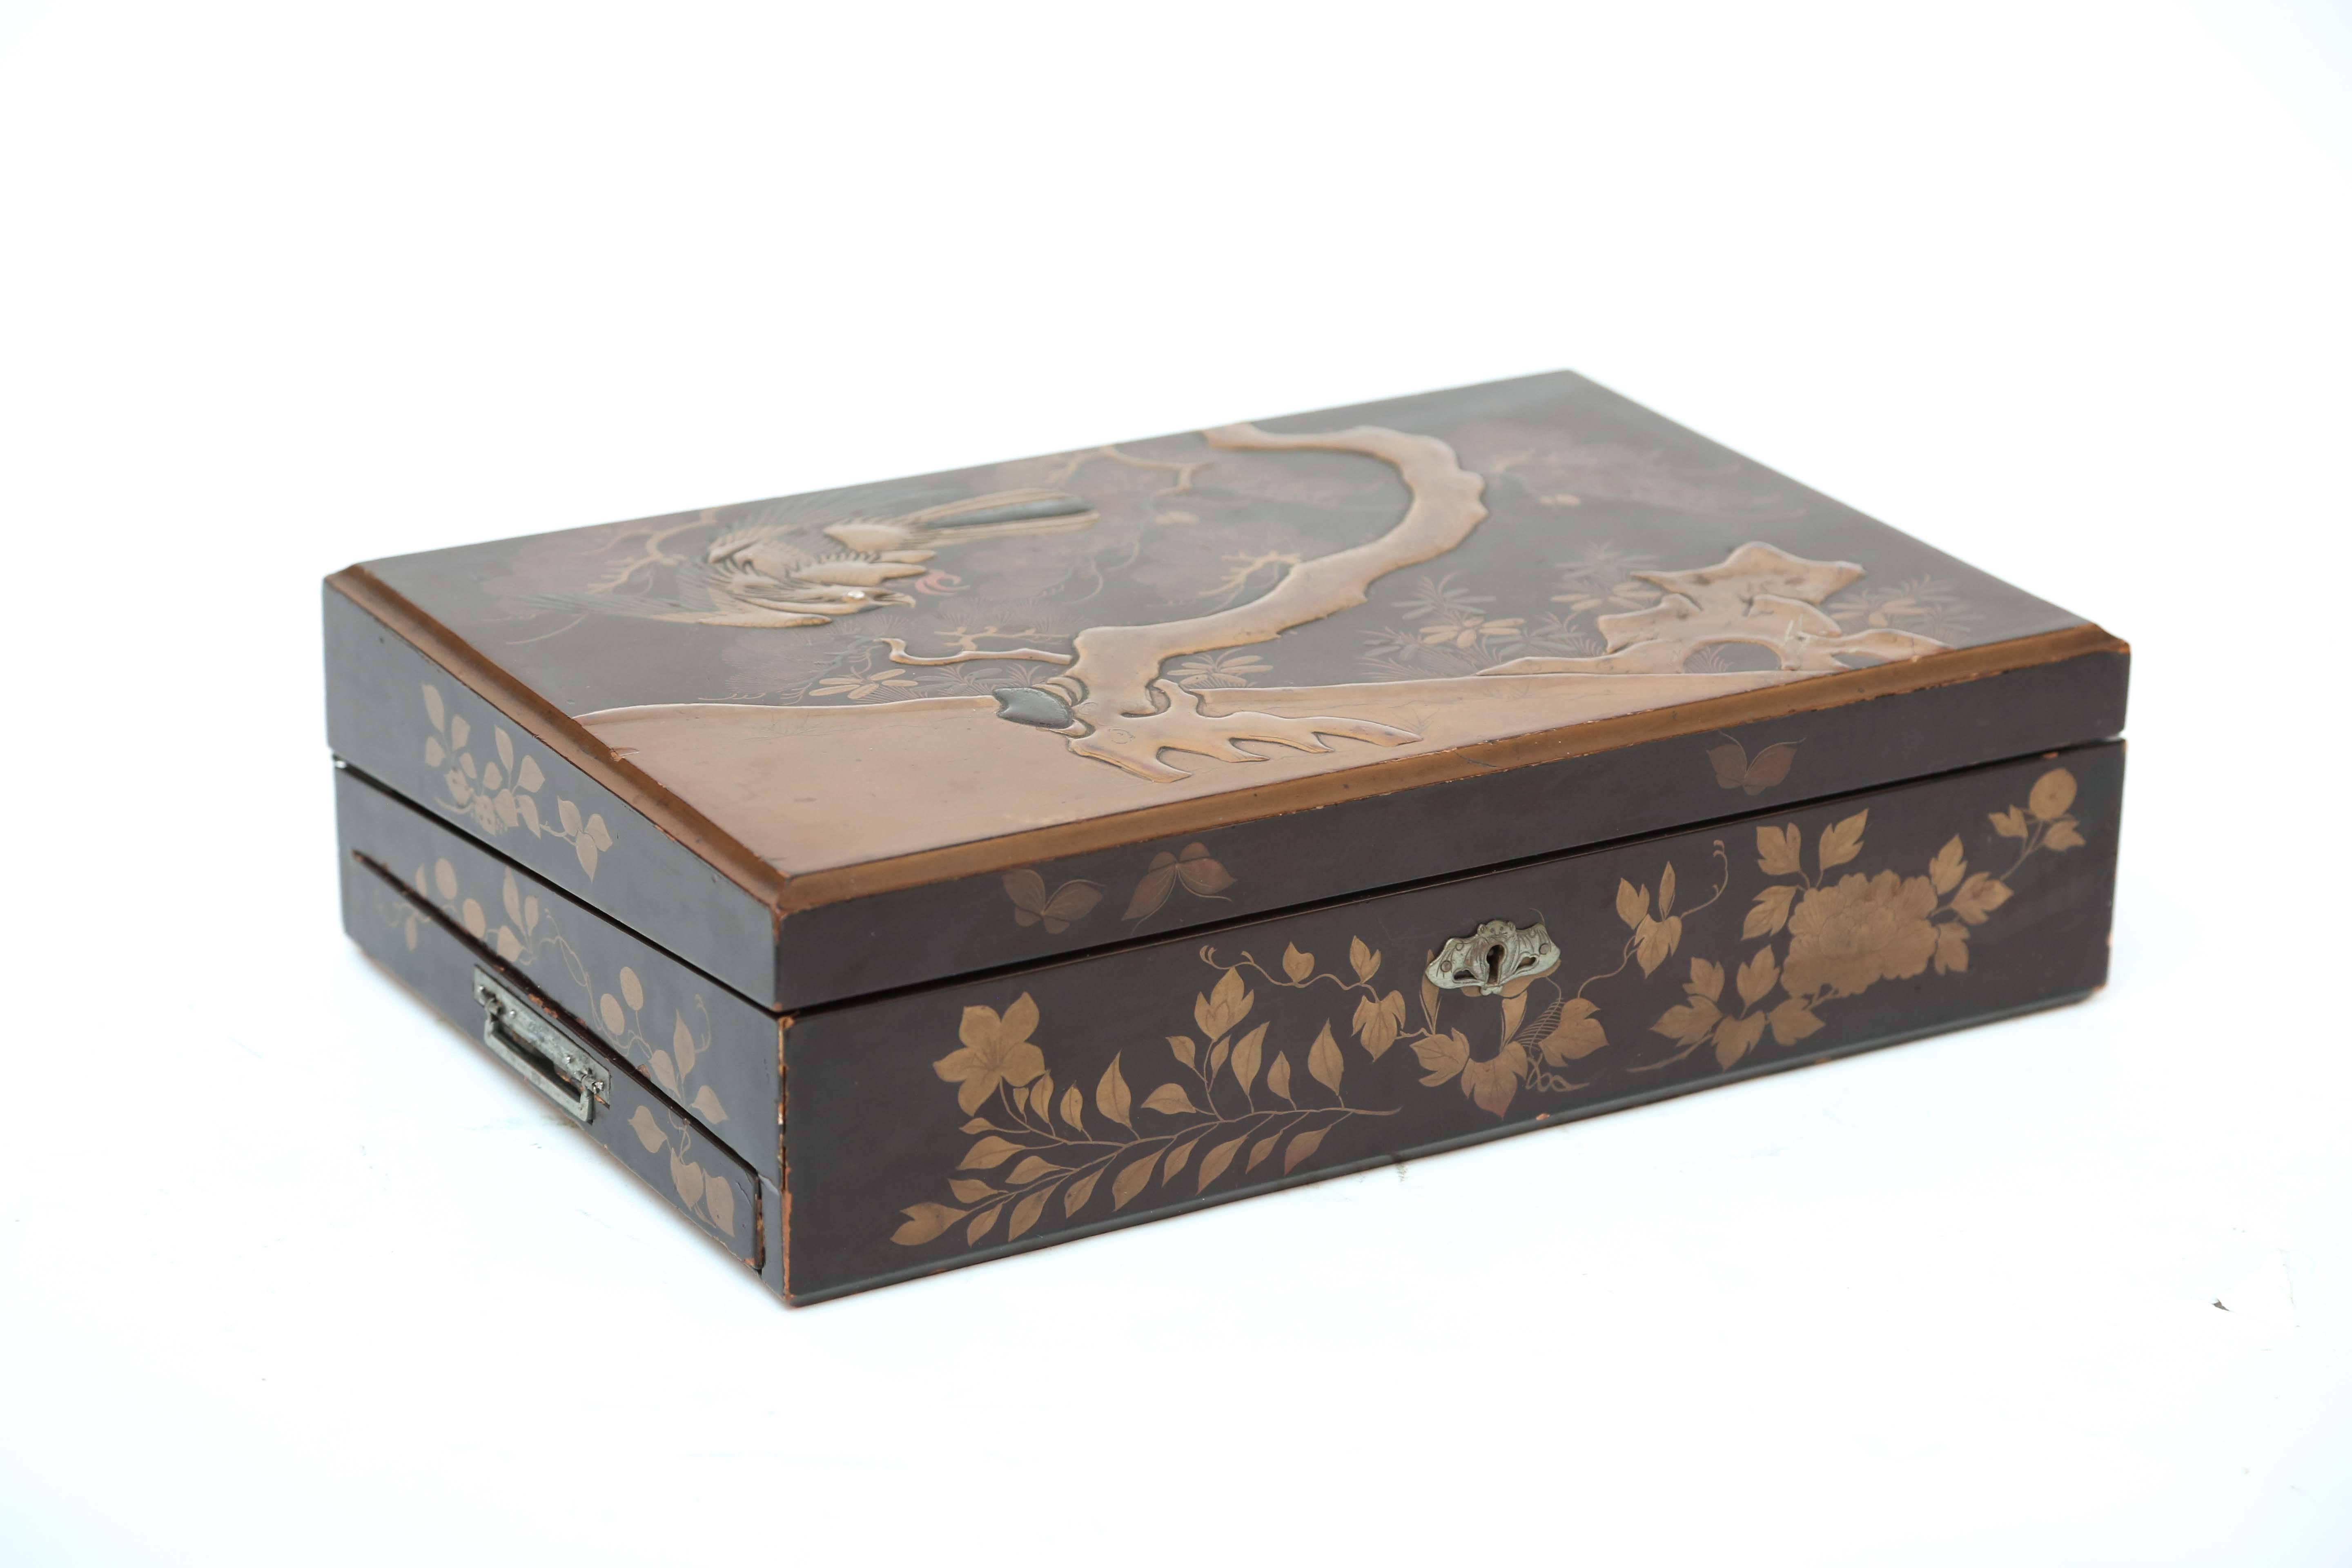 A fine Meiji lap desk. Superbly lacquered featuring a detailed figure of an eagle.